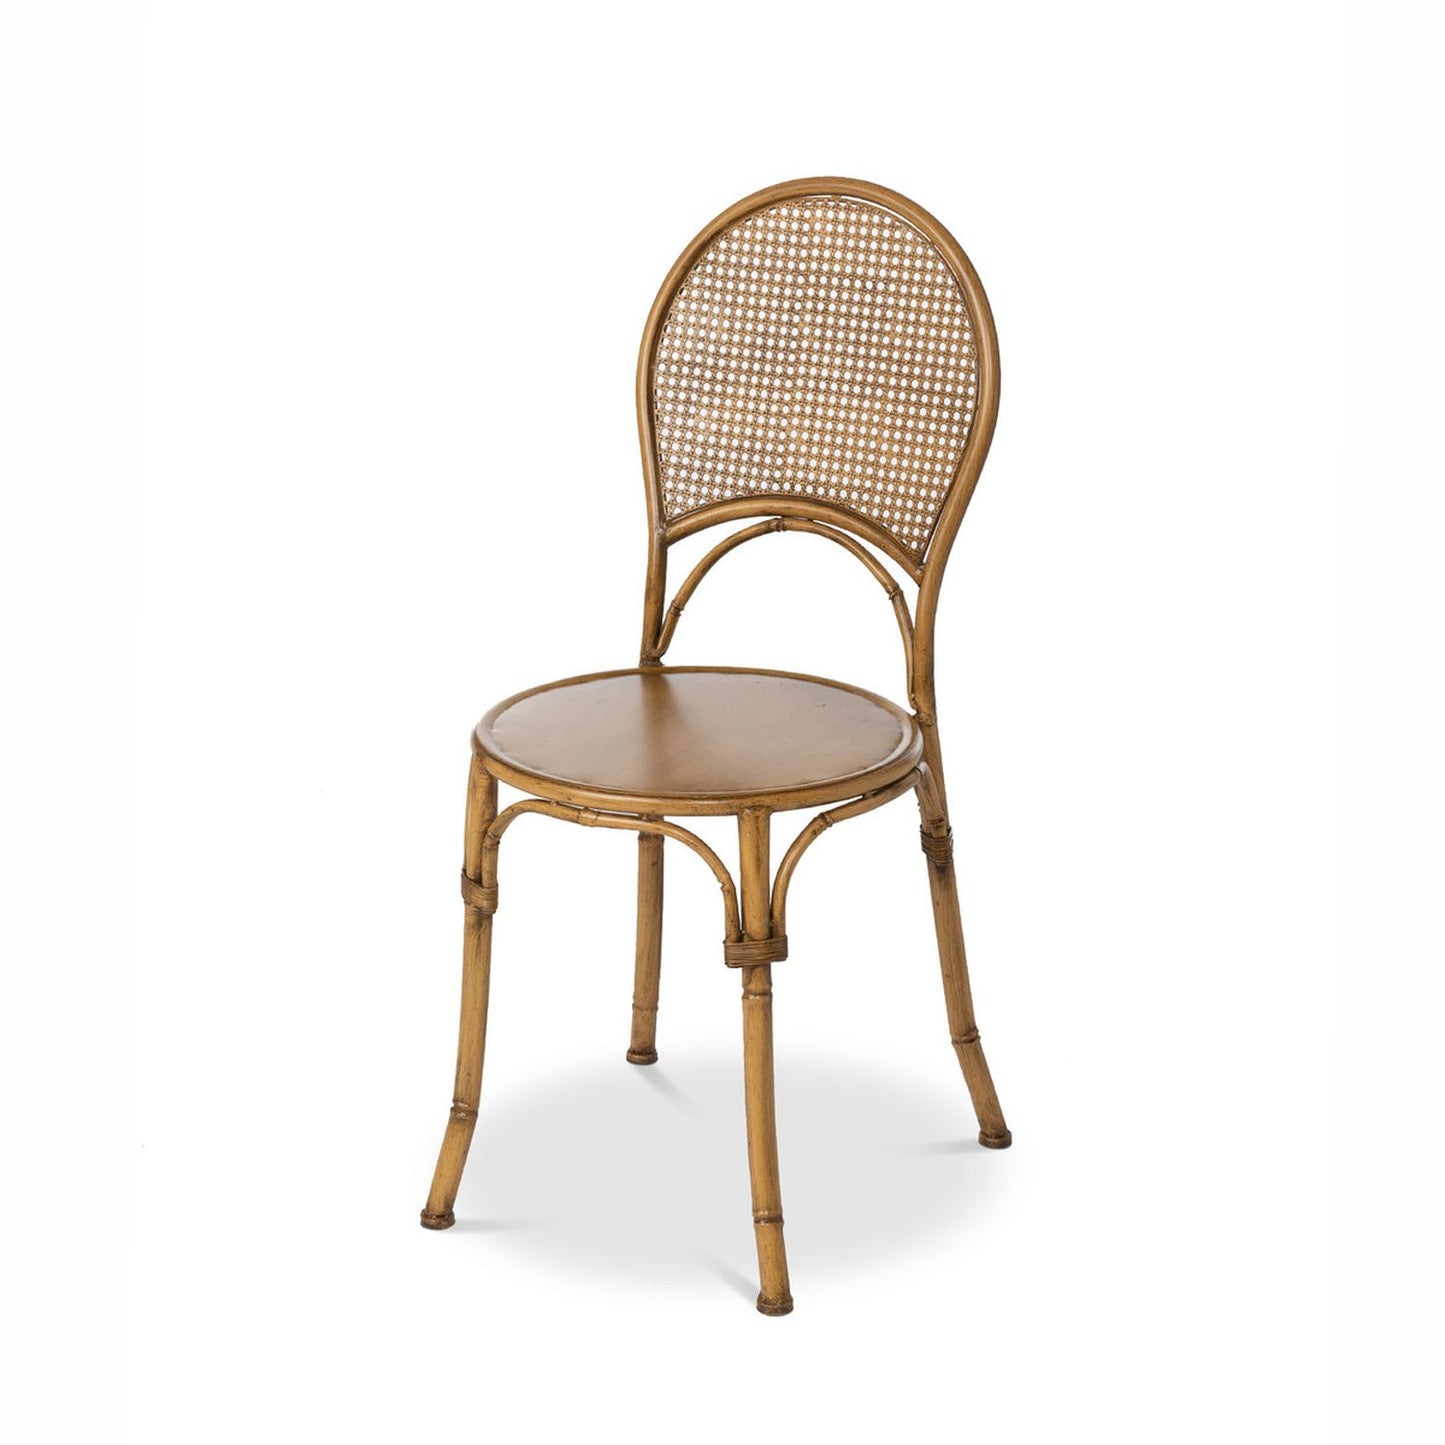 Park Hill Collection Roanoke Metal Bistro Chair